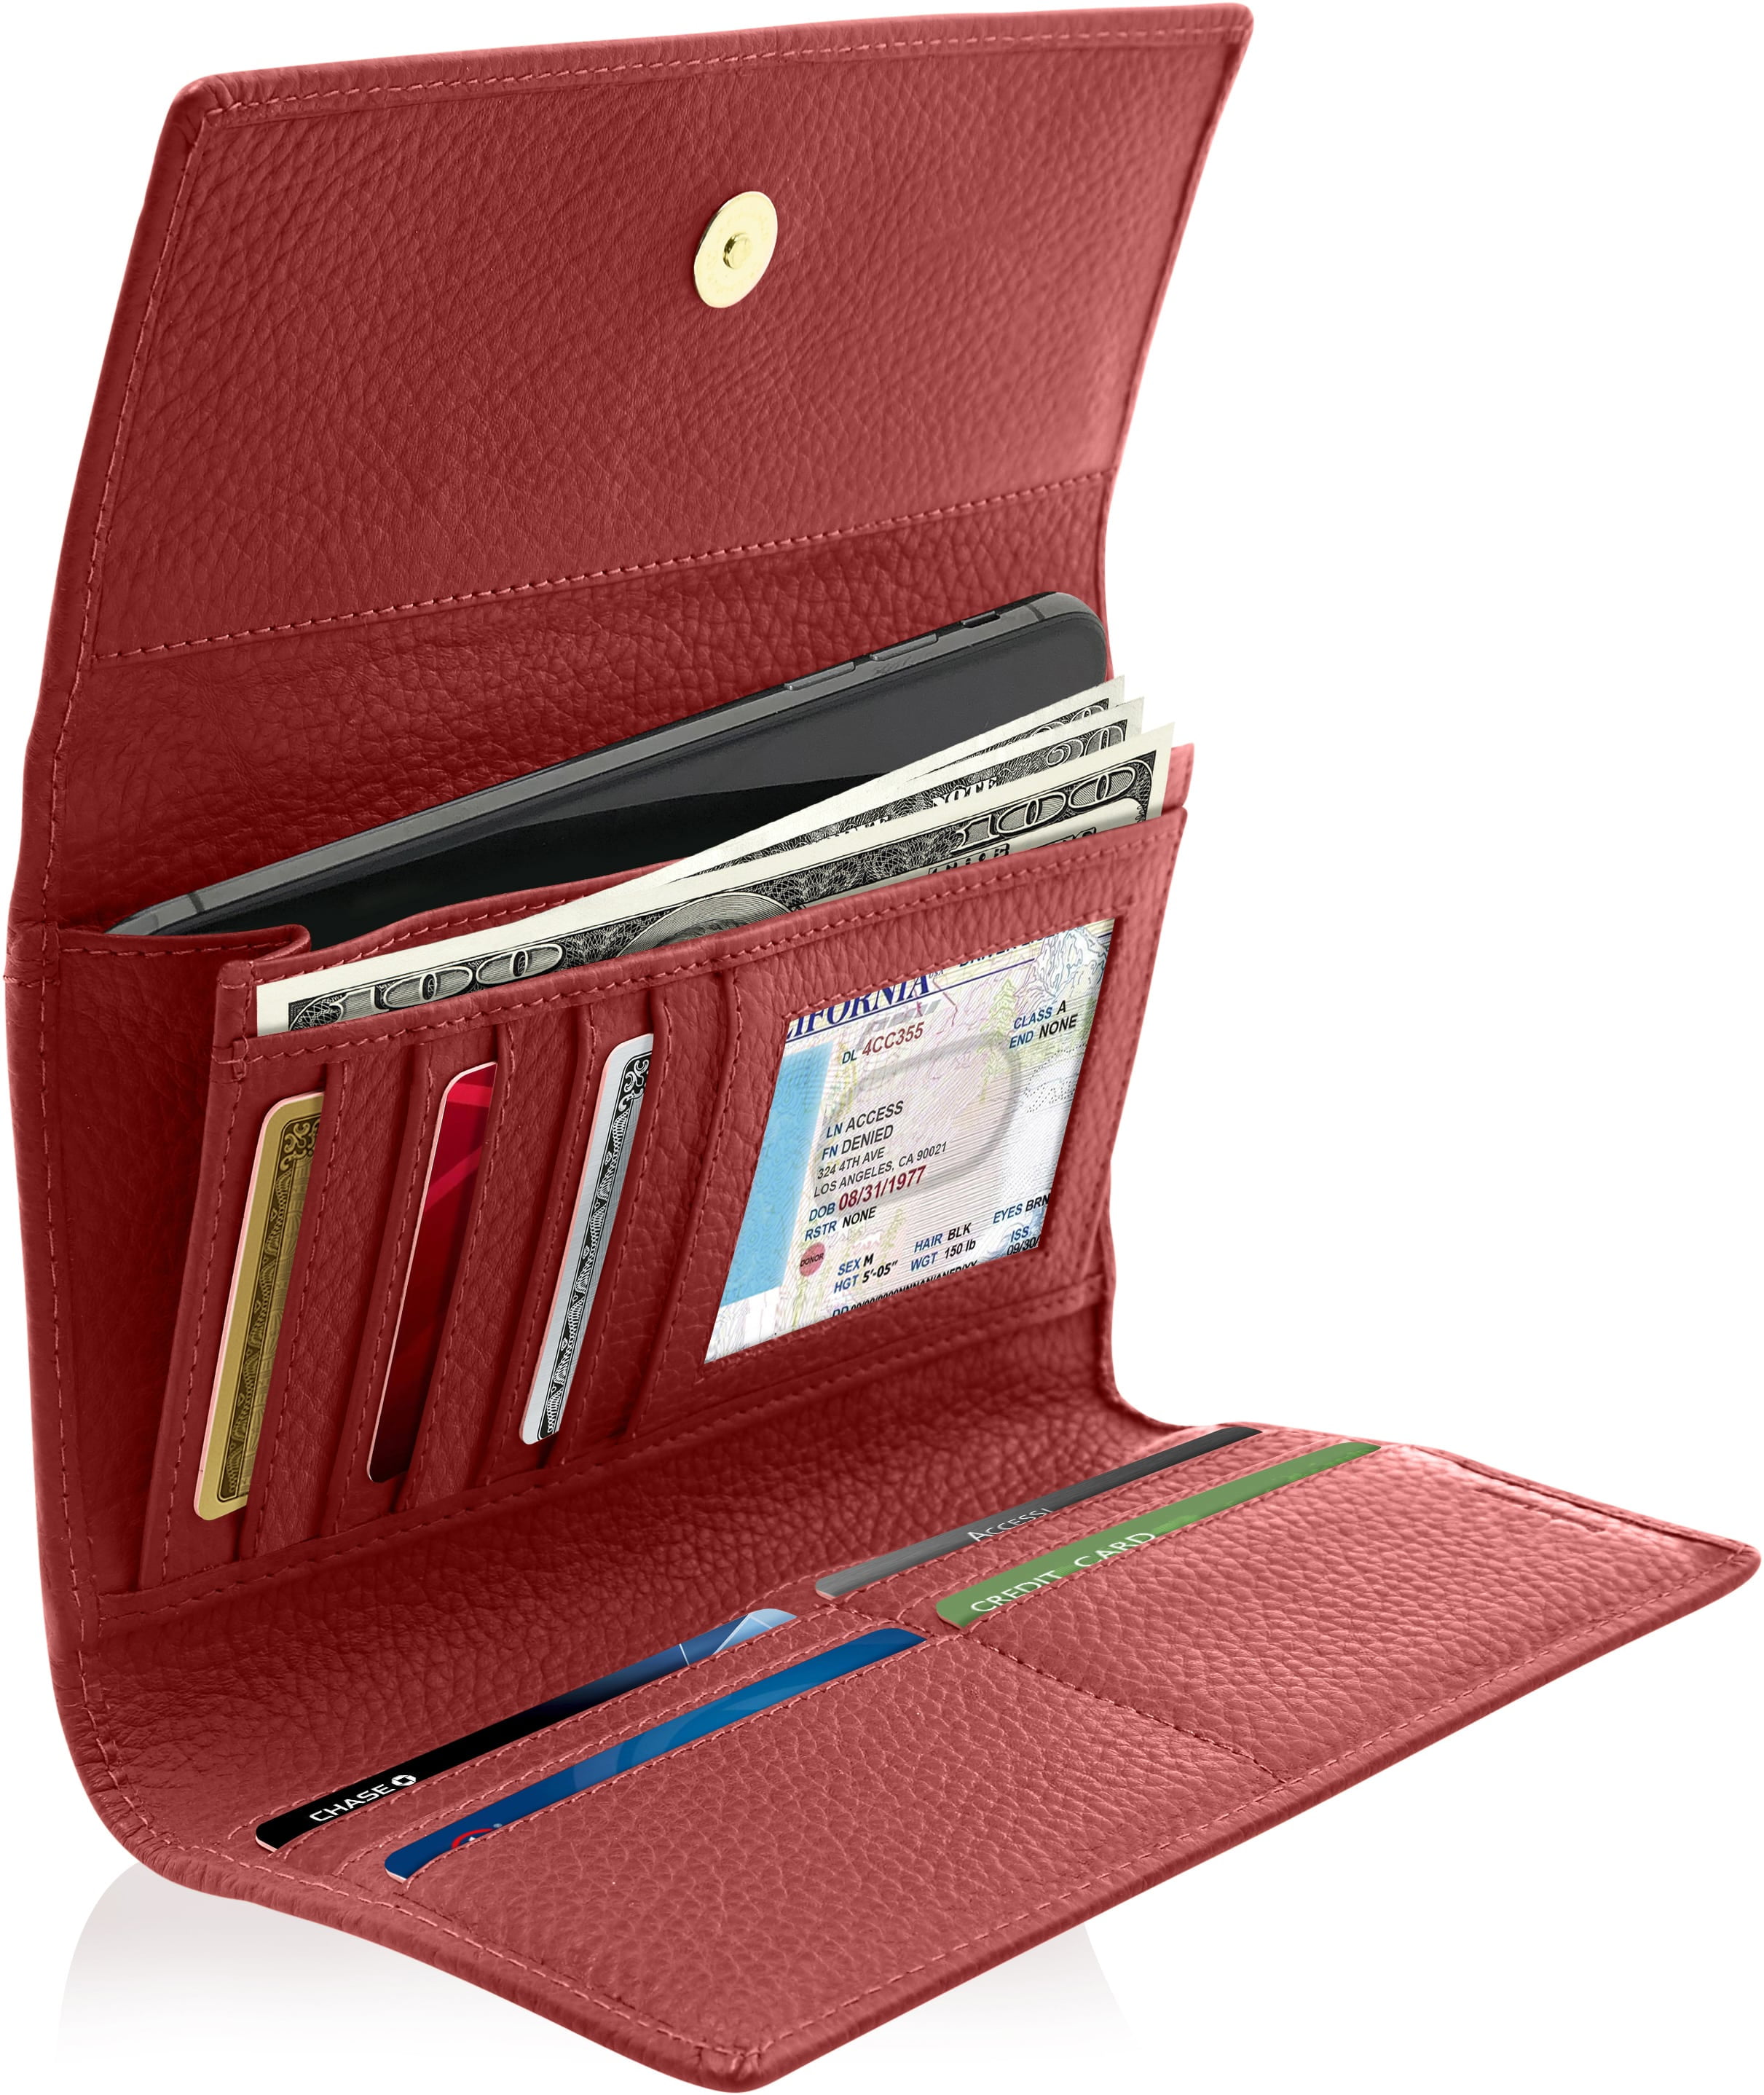 Ladies Leather Purse Wallet Organizer Red with Large Coin Pocket RFID PROOF 